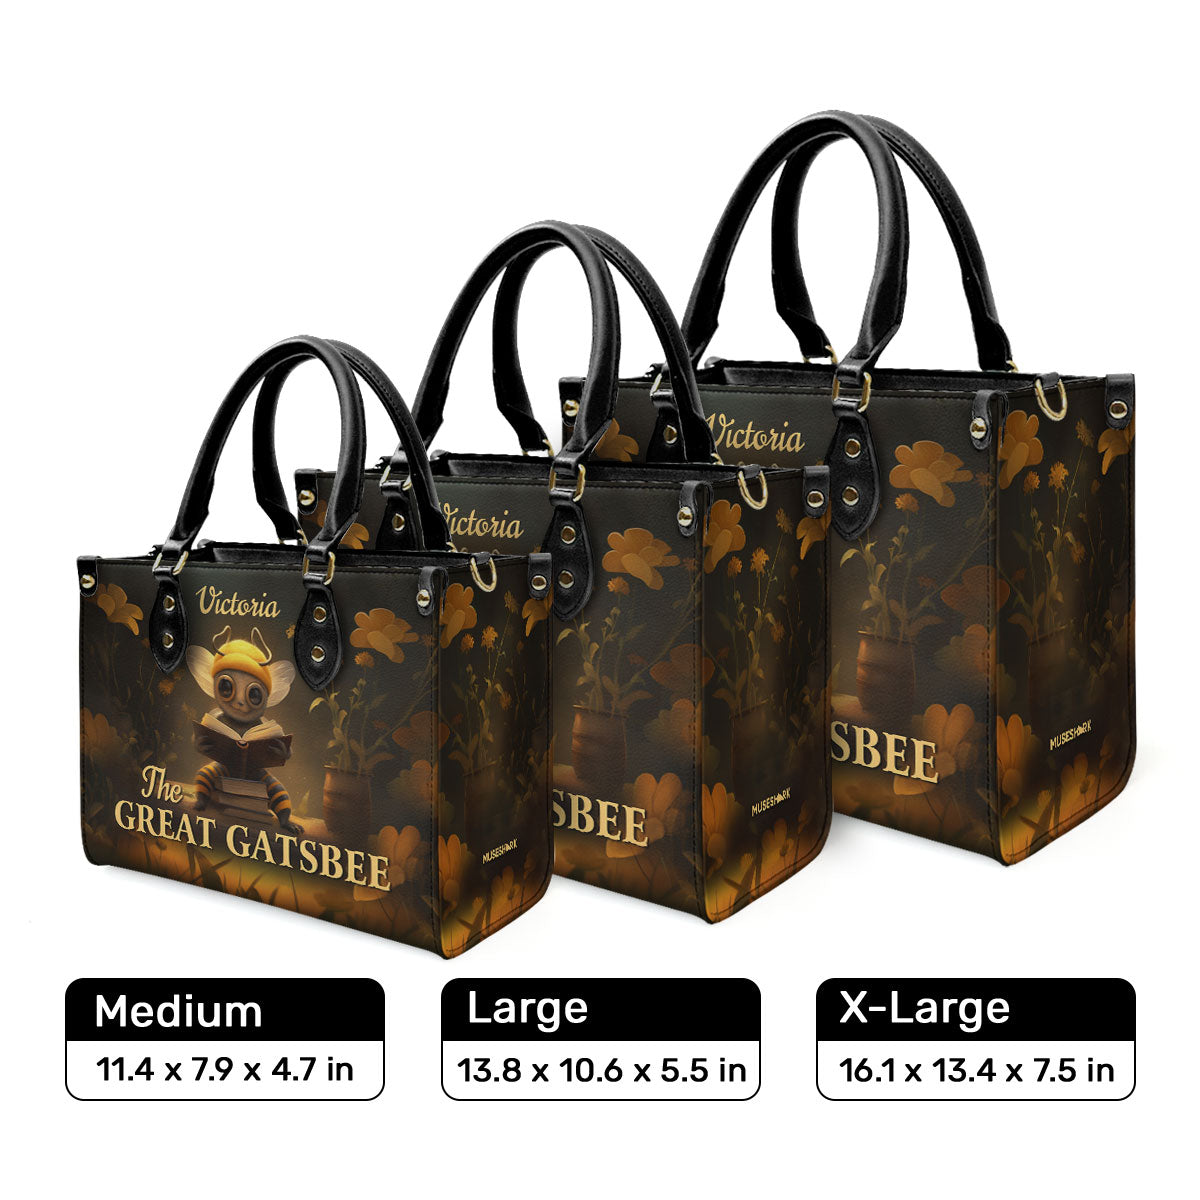 The Great Gatsbee - Personalized Leather Handbag MS-NH31A